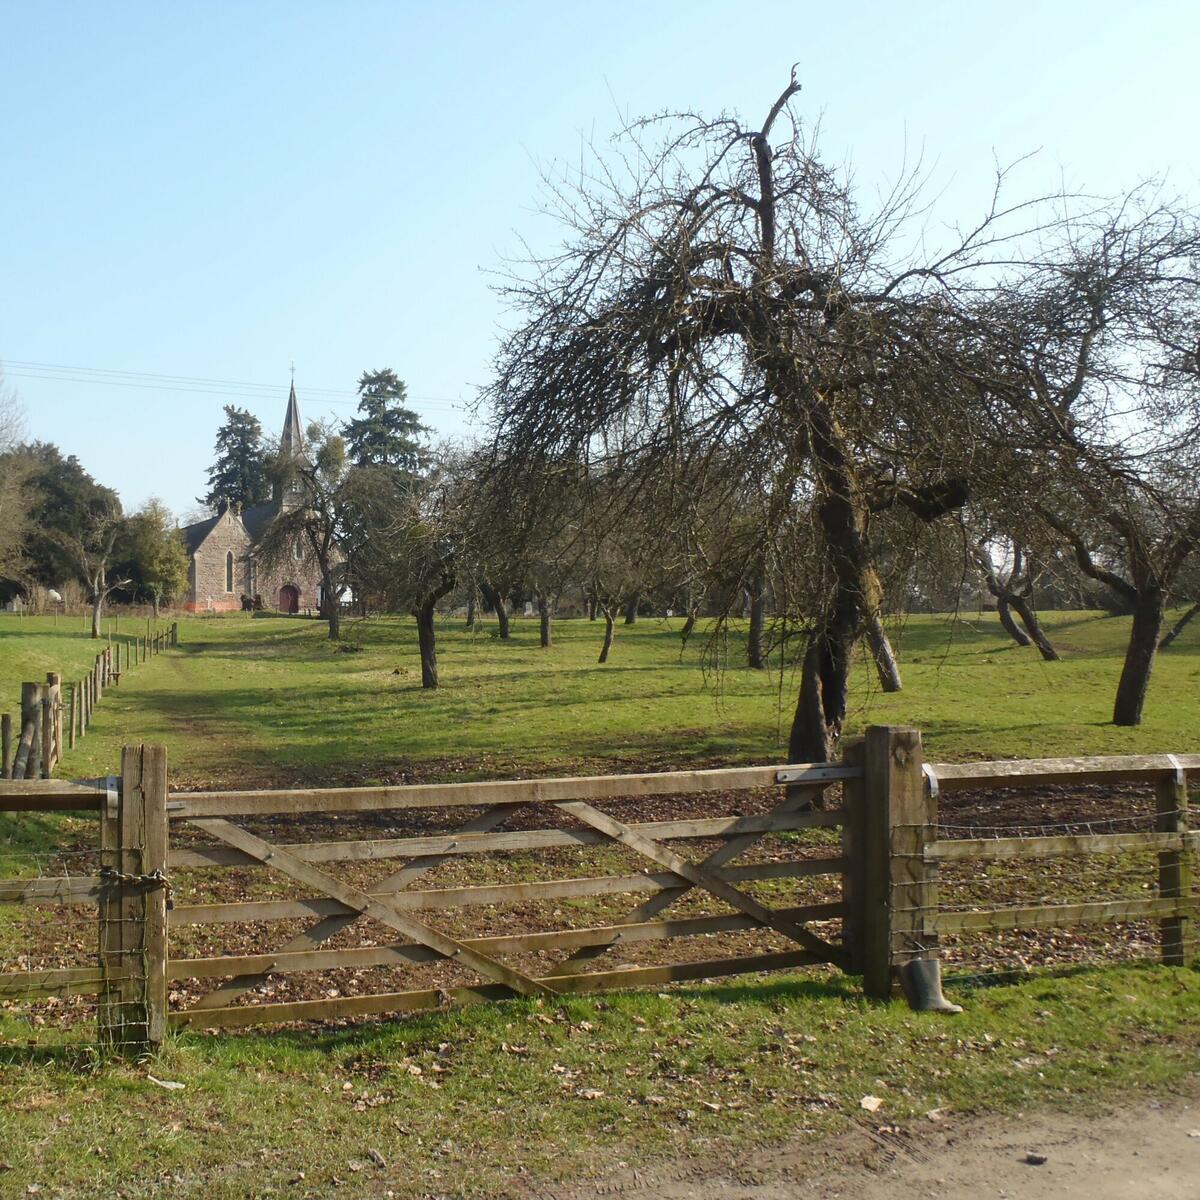 The orchard with church in the background.